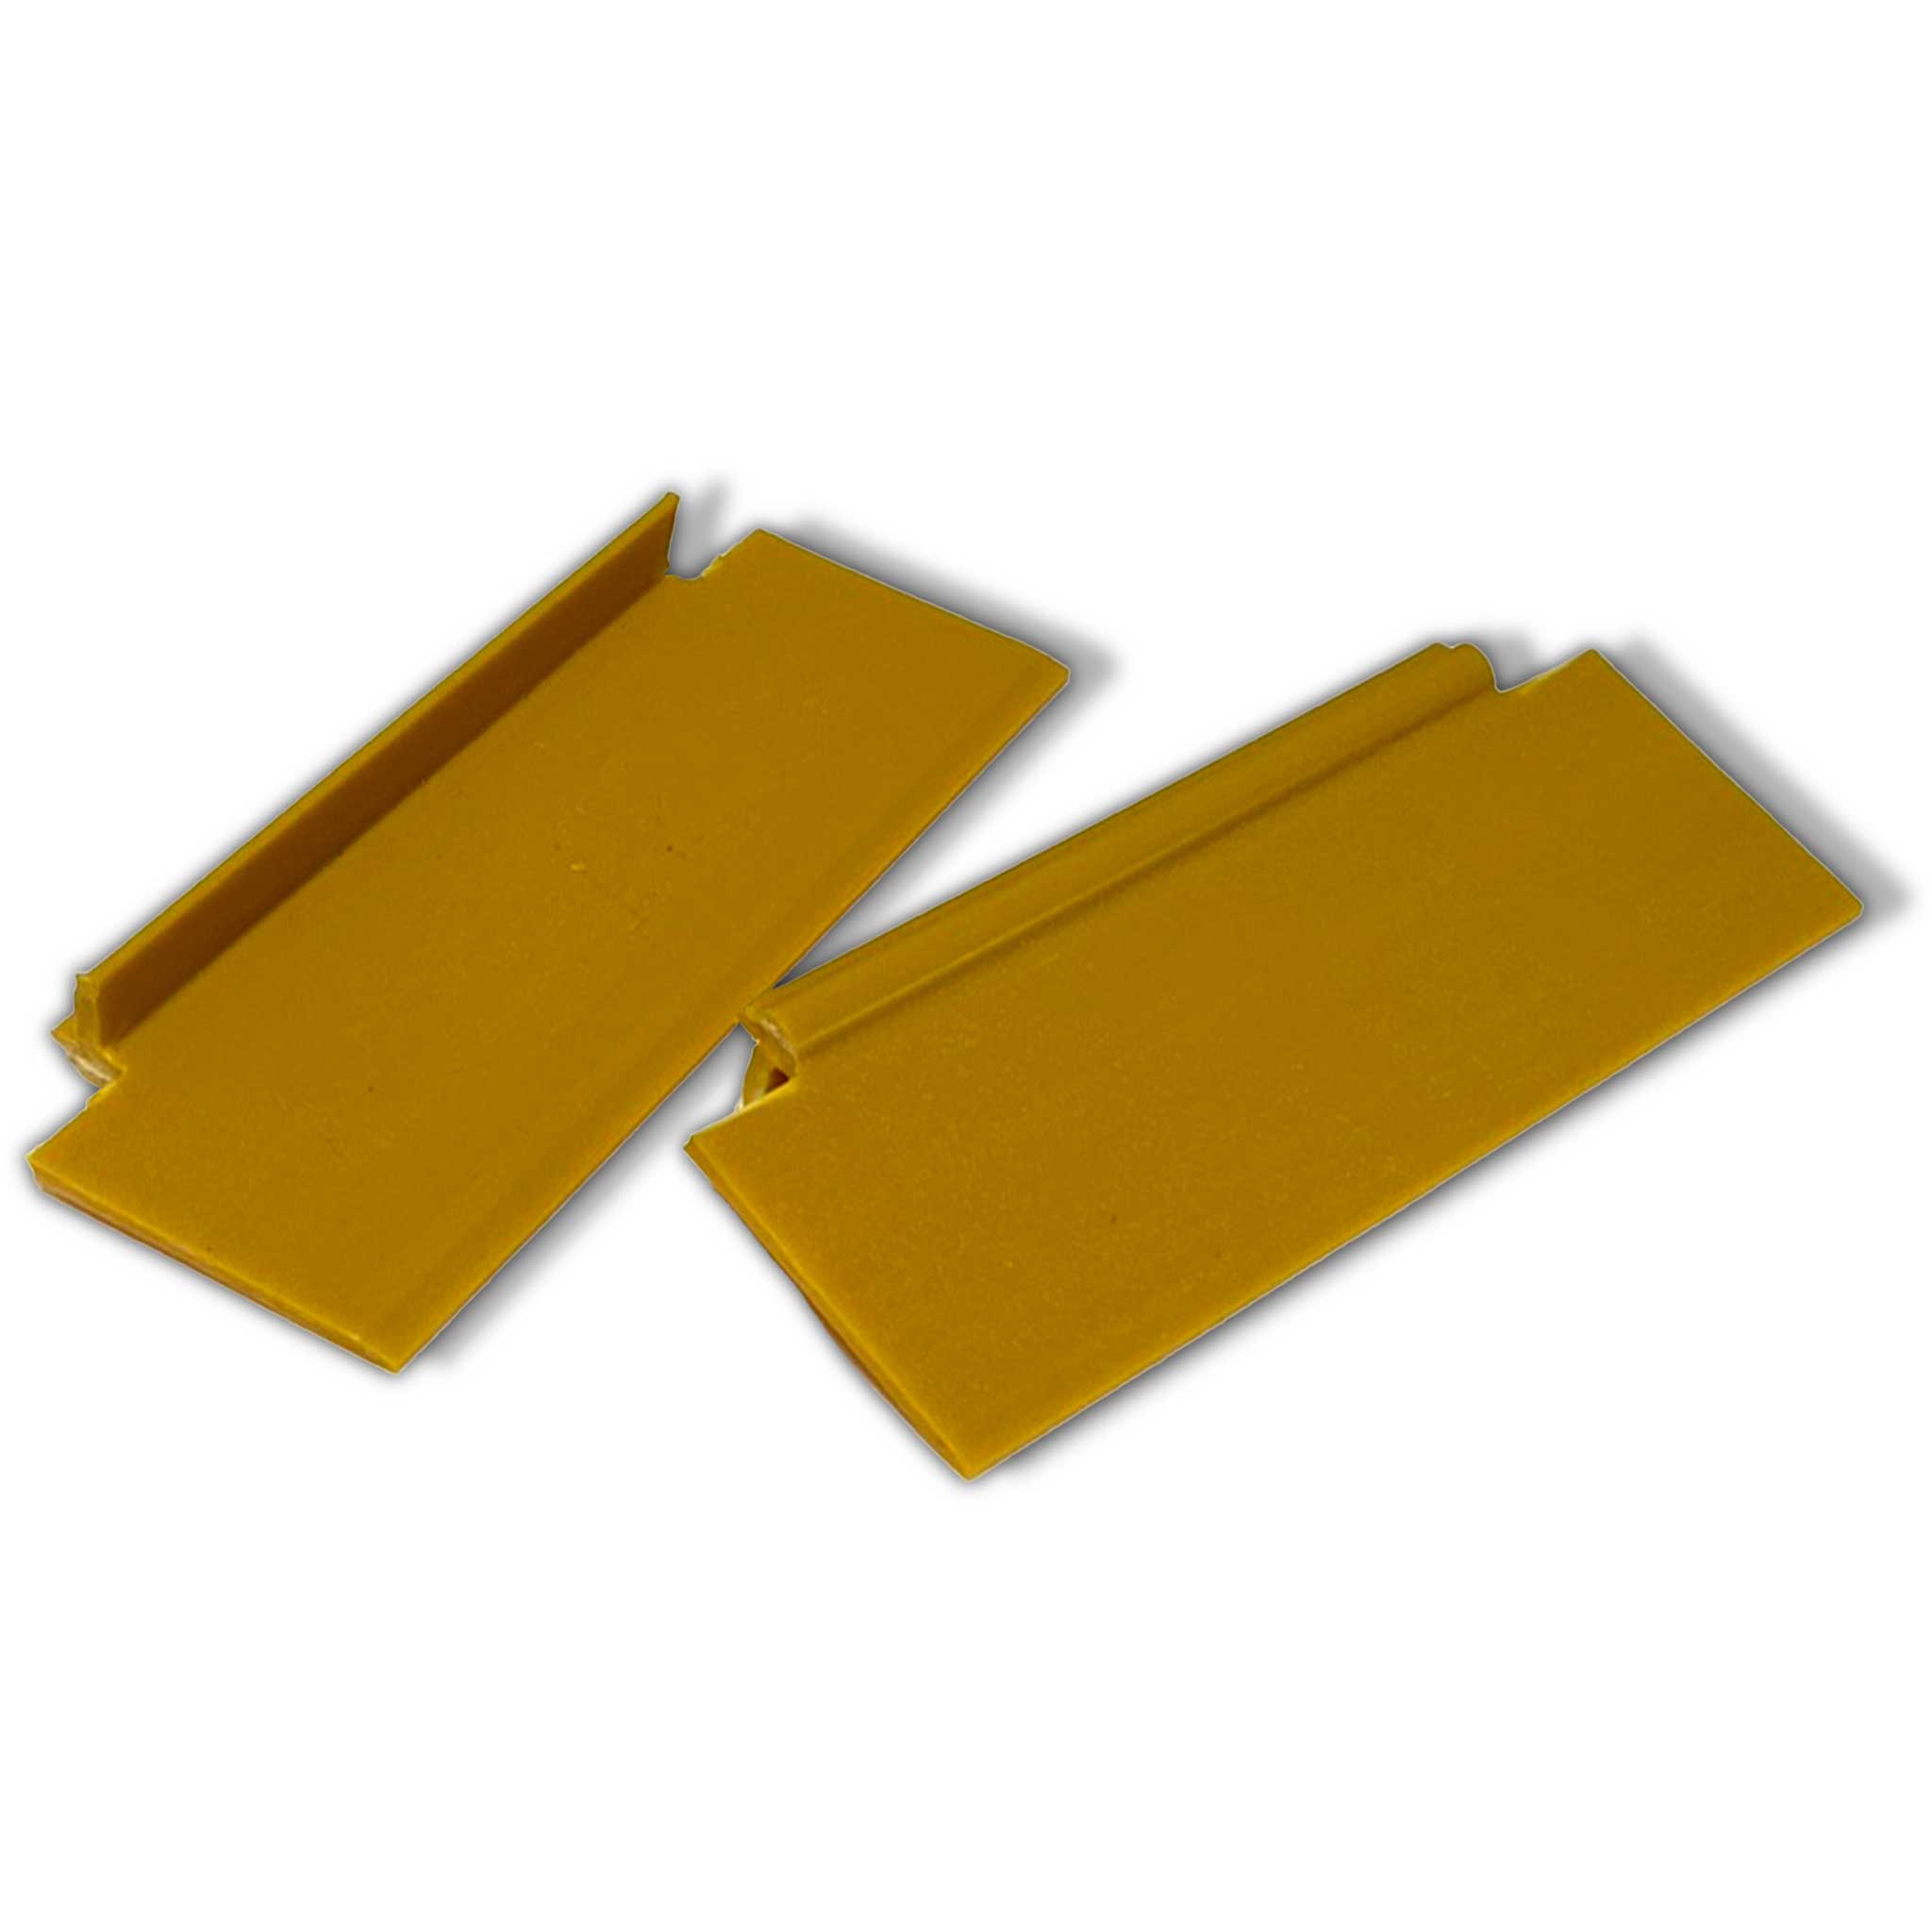 Paradise Honey 6 Frame Hive Base Floor Entrance Reducers (2 Pack) -  collection by Buzzbee Beekeeping Supplies